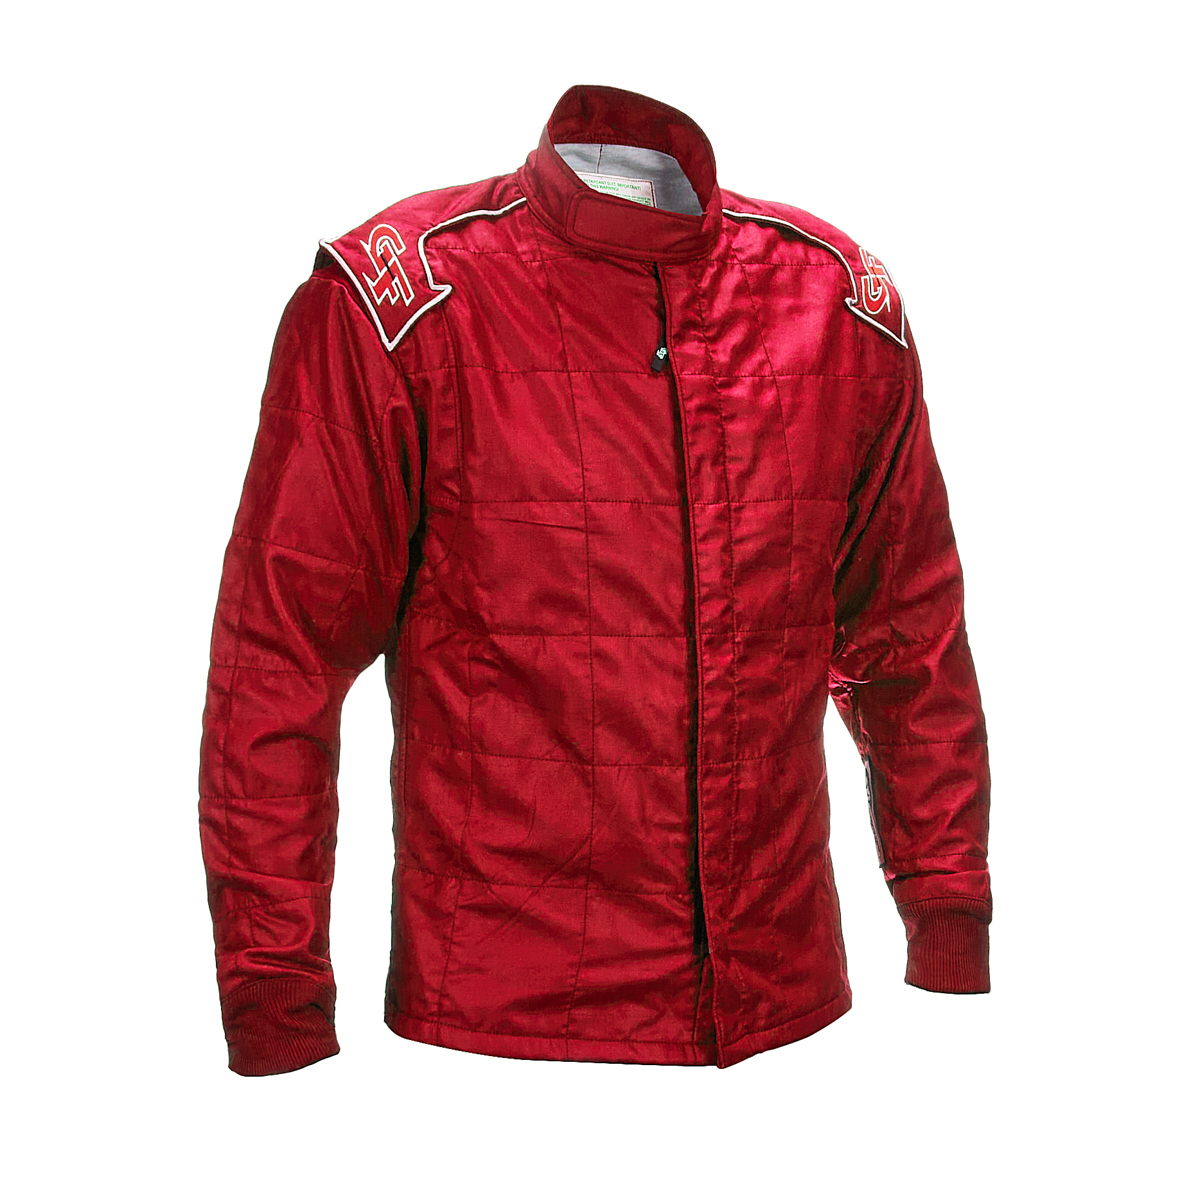 G-Force Racing Gear 354524XLRD Driving Jacket, G-Limit, SFI 3.2A/5, Multiple Layer, Fire Retardant Cotton / Nomex, Red, 4X-Large, Each